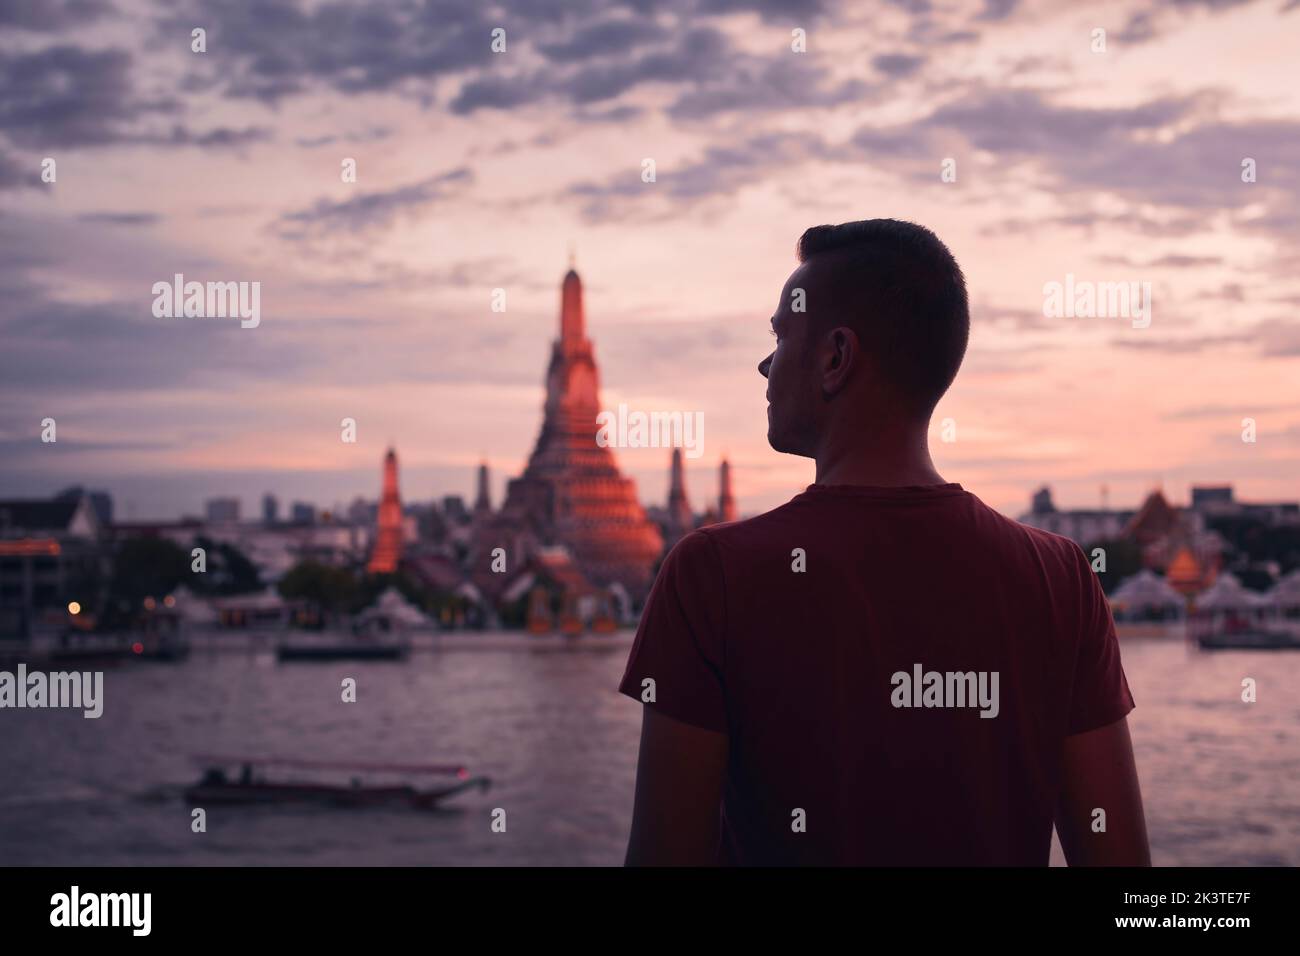 Rear view of tourist against cityscape with Chao Phraya River and Wat Arun at beautiful sunset. Bangkok, Thailand Stock Photo